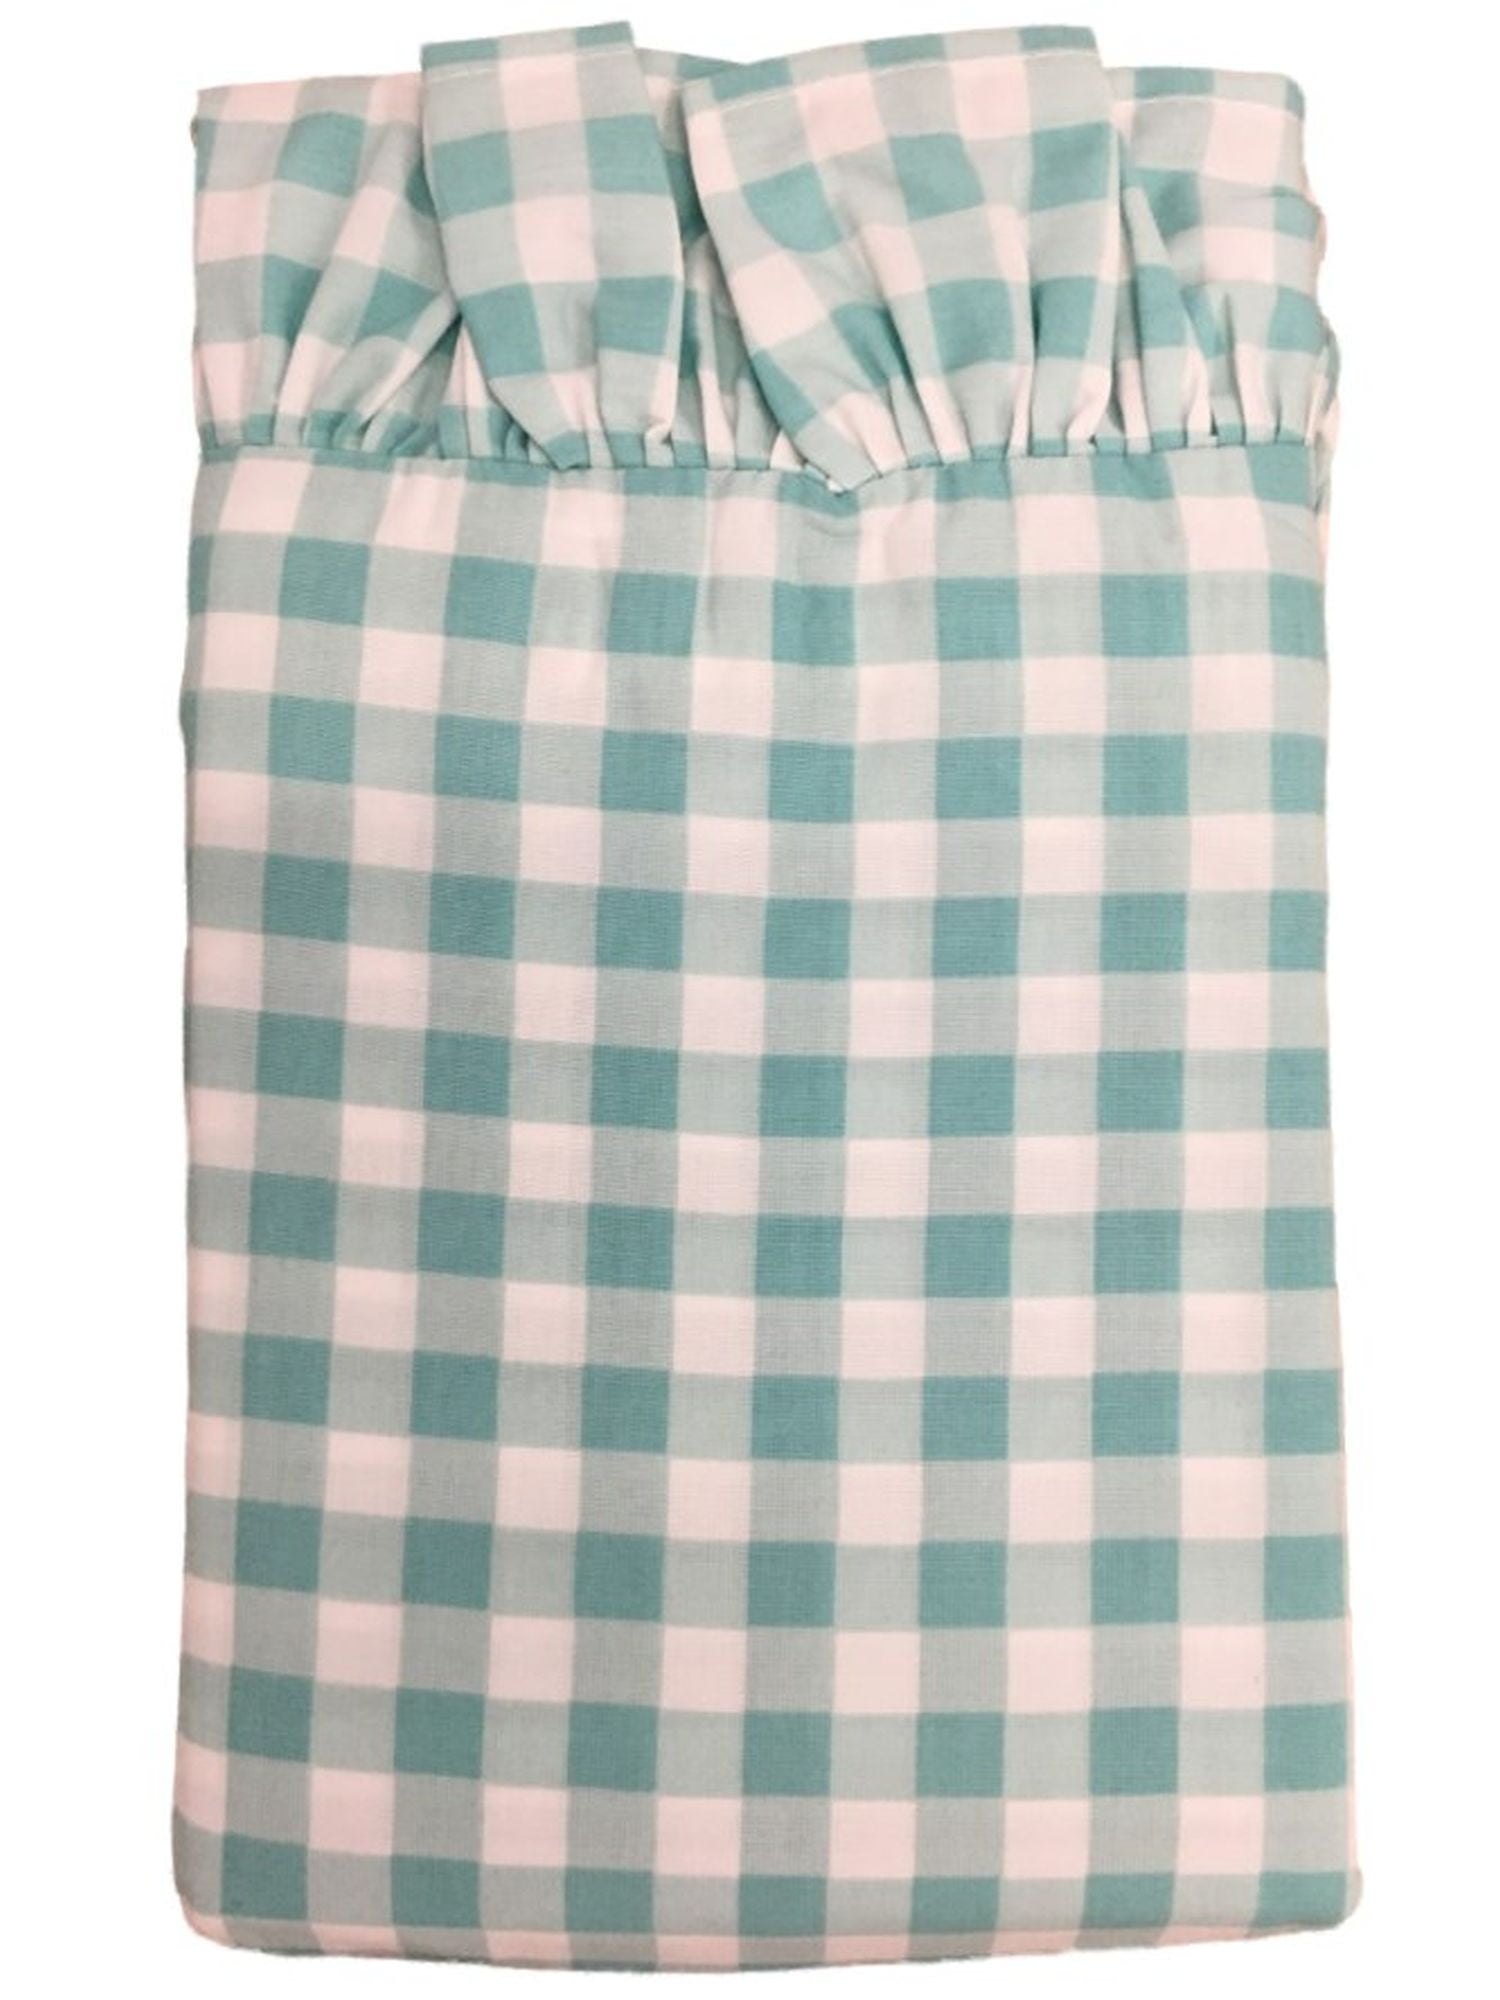 The Pioneer Woman Gingham Ruffle Pillowcases Teal Country Check Standard Size 